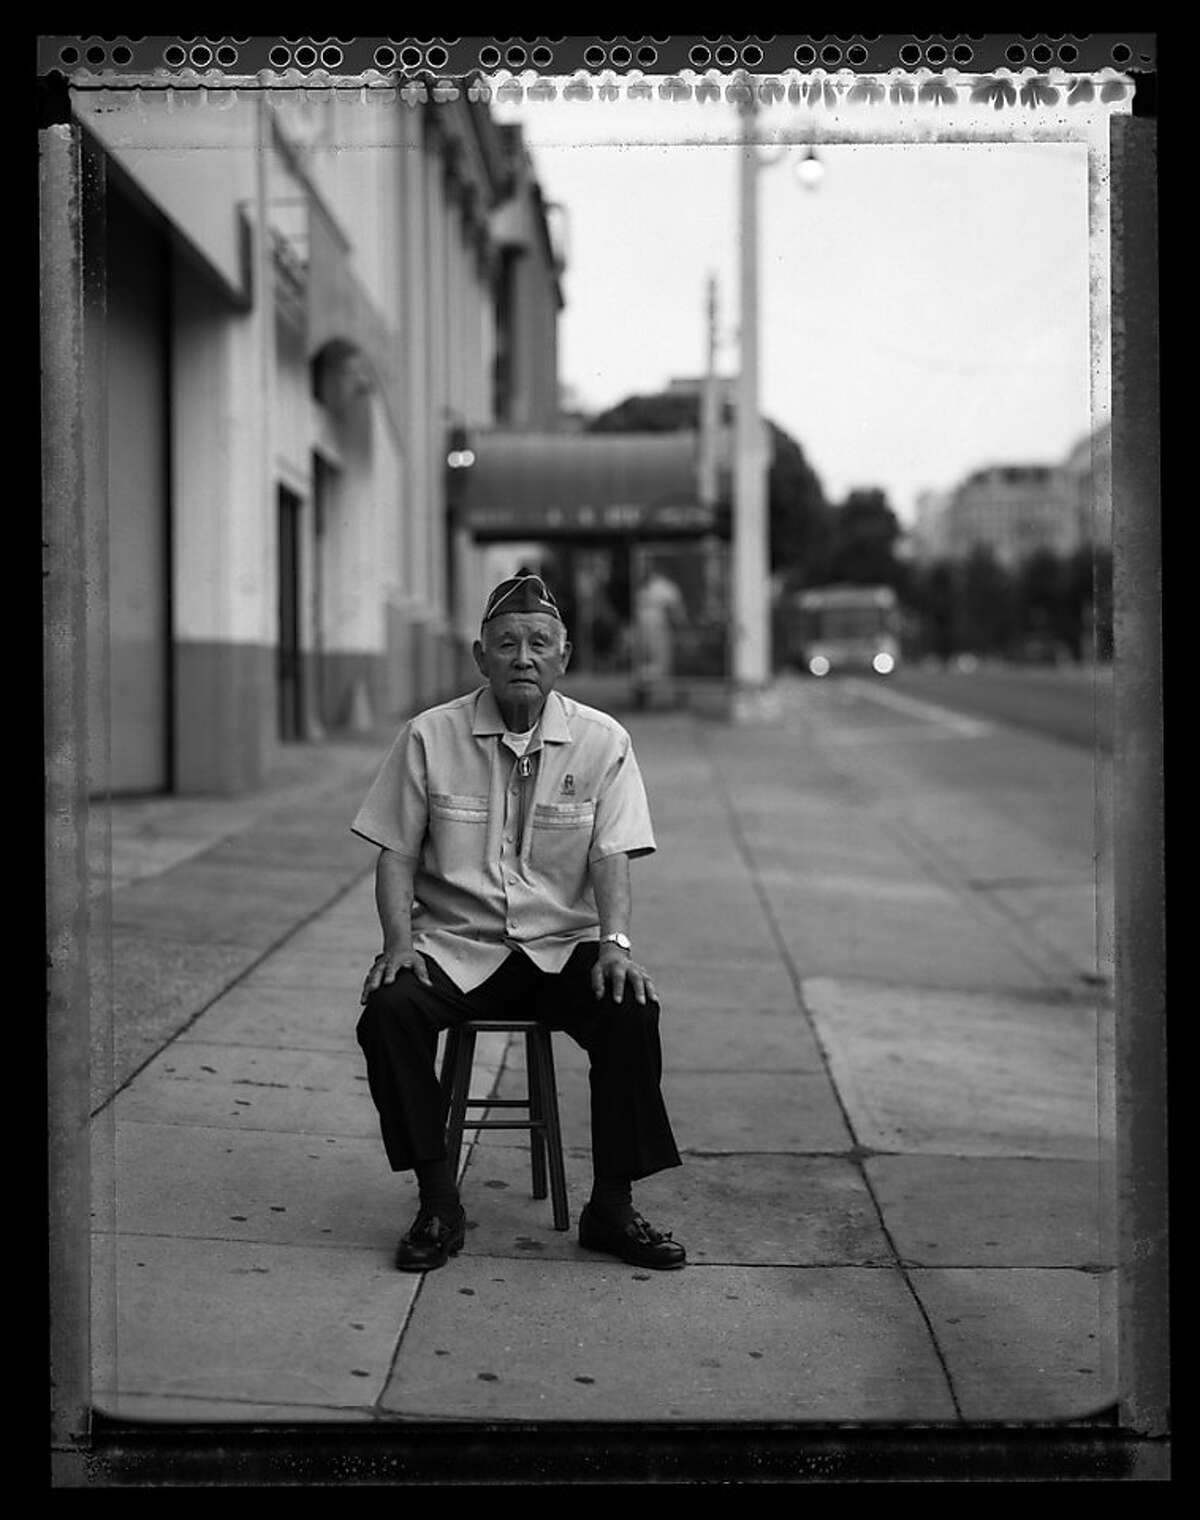 Mitsunobu ÒMitsÓ Kojimoto, 85, sits in outside the building on Van Ness Street in San Francisco July 11, 2008 where he waited for a bus to take him to the SantaAnita Assembly Center. At age 19, Kojimoto volunteered for the U.S. Army and joined the 442nd Regimental Combat Team, H company. He received the Bronze Star for his service in France and Italy.